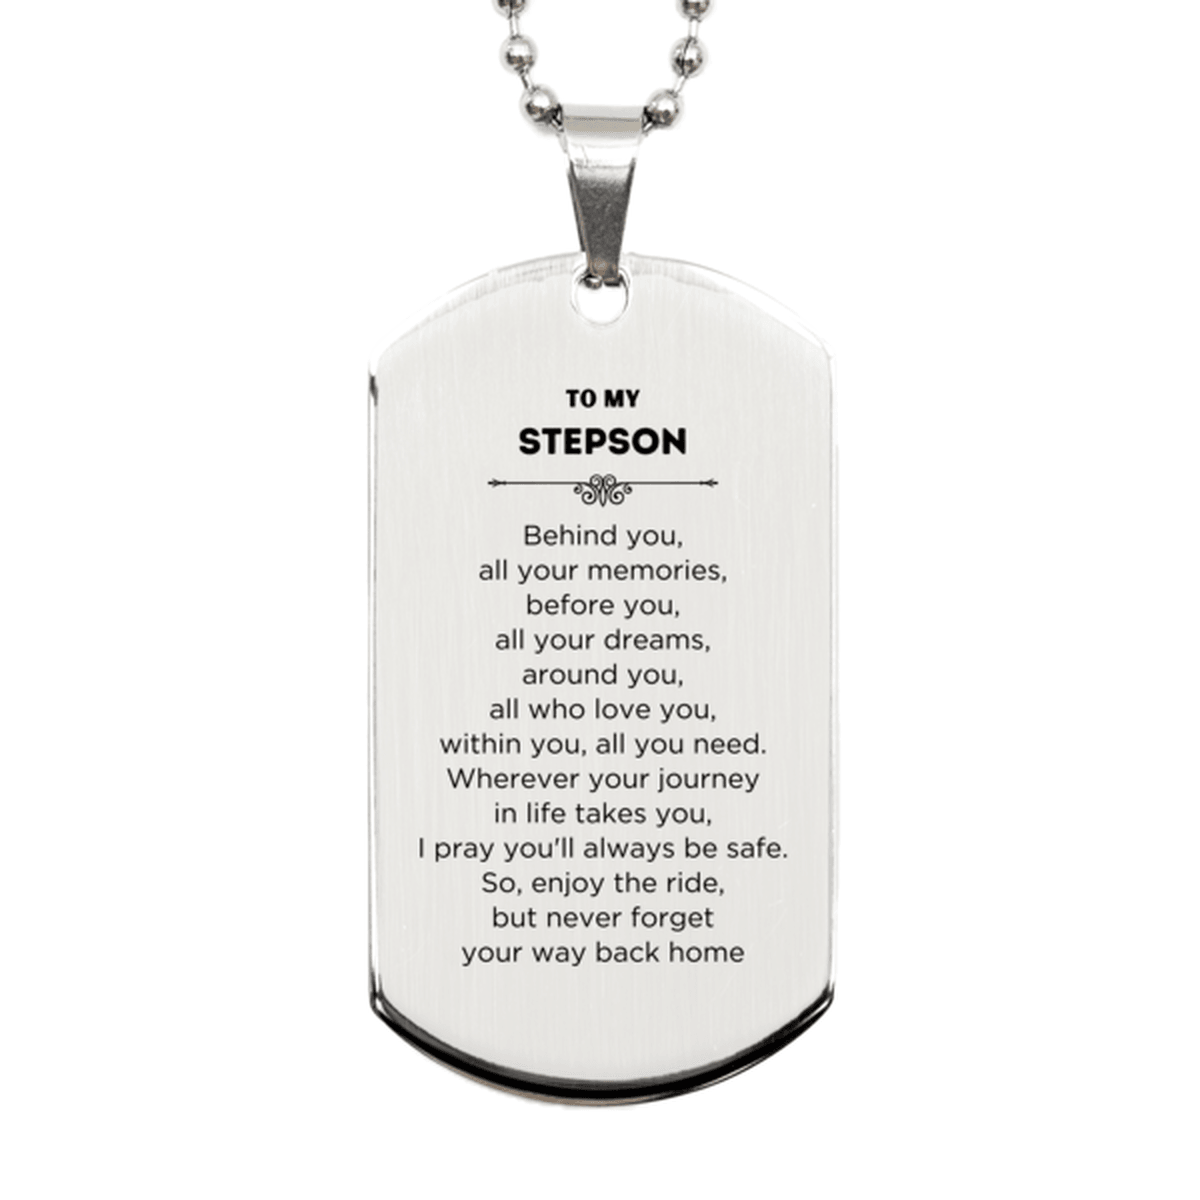 Stepson Silver Dog Tag Necklace Birthday Christmas Unique Gifts Behind you, all your memories, before you, all your dreams - Mallard Moon Gift Shop